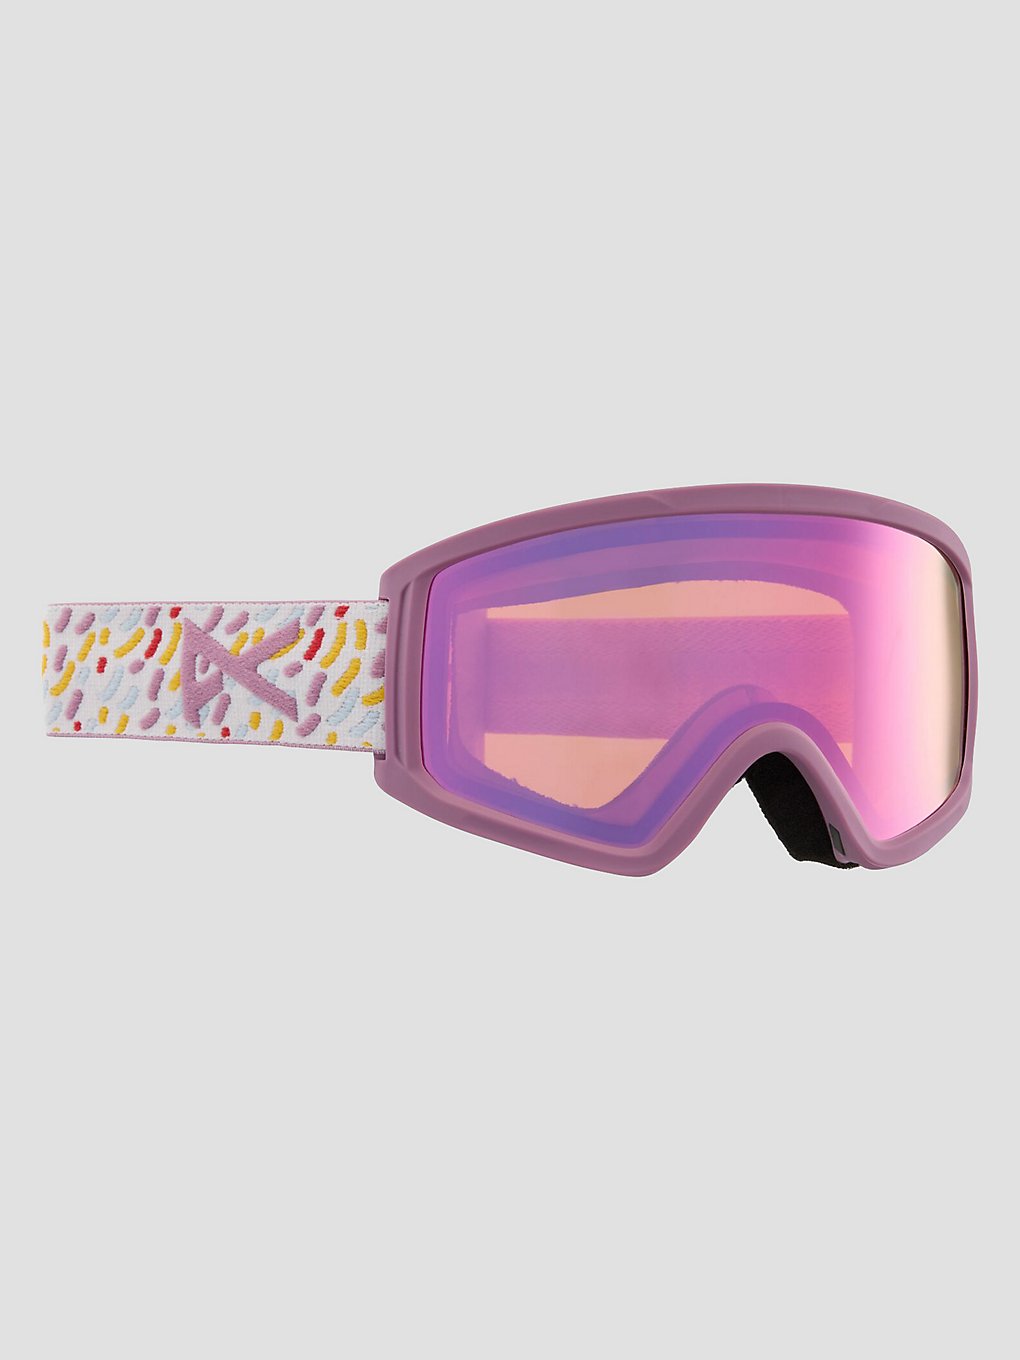 Anon Tracker 2.0 Sprinkle Goggle pink amber kaufen